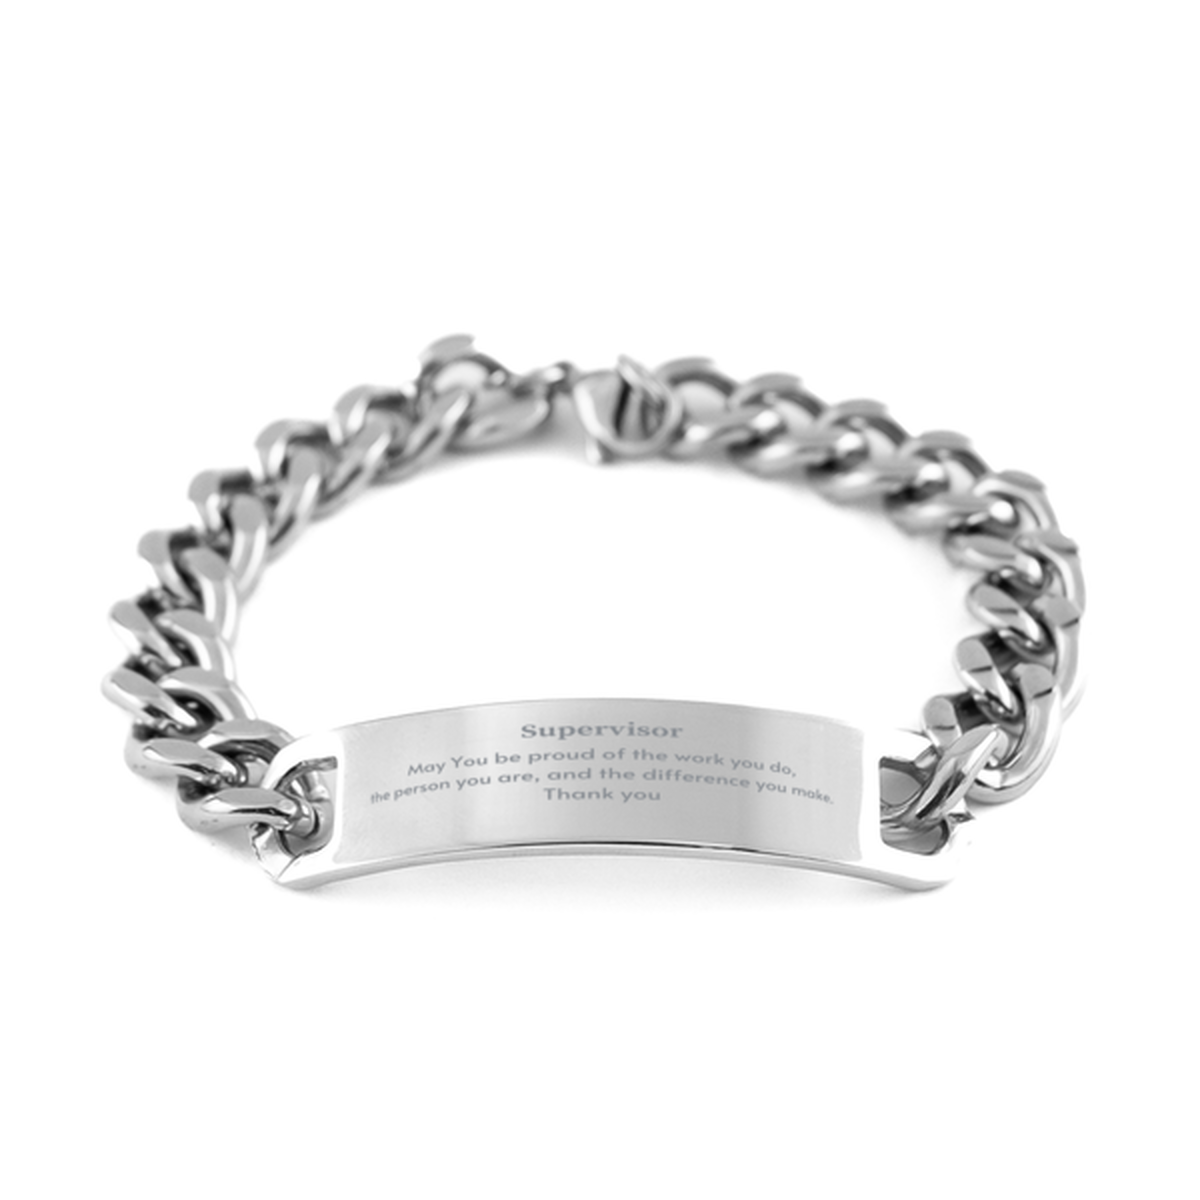 Heartwarming Cuban Chain Stainless Steel Bracelet Retirement Coworkers Gifts for Supervisor, Supervisor May You be proud of the work you do, the person you are Gifts for Boss Men Women Friends